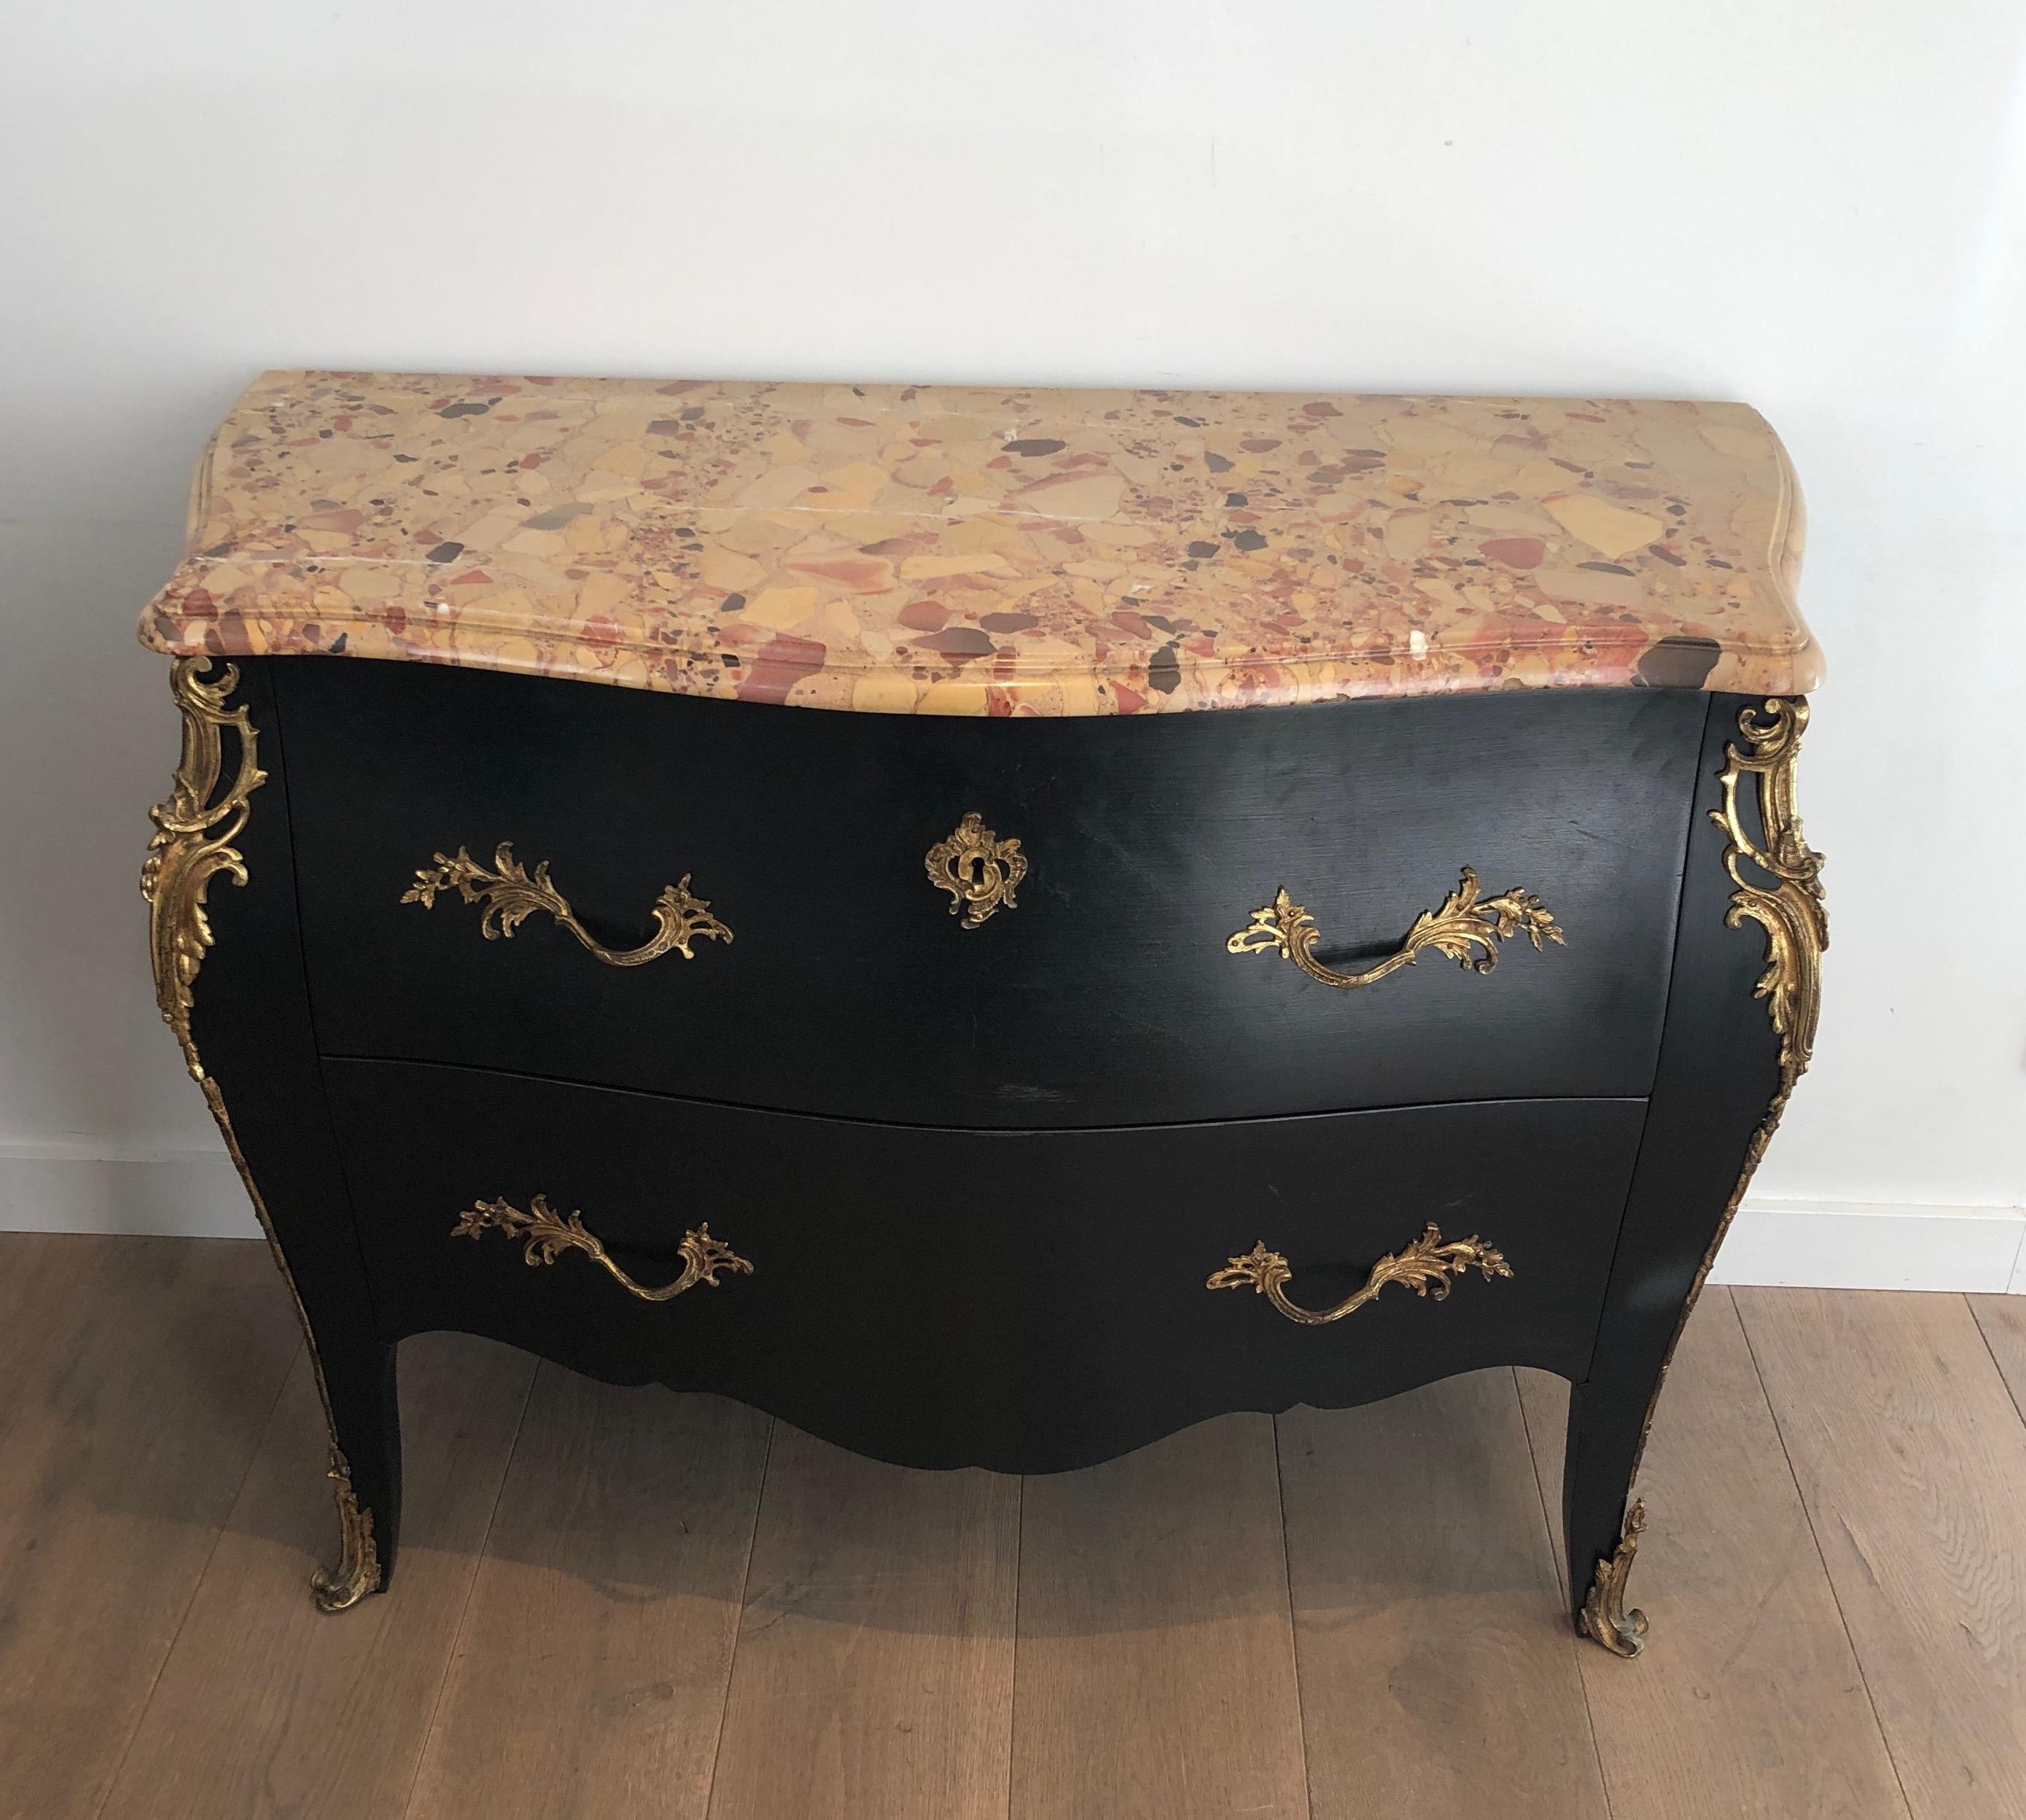 This very nice curved chest of drawers is made of ebonized wood with finely chiseled bronze elements. The piece is stamped by De Beyne Roubaix. This is a Frenh work, circa 1880.